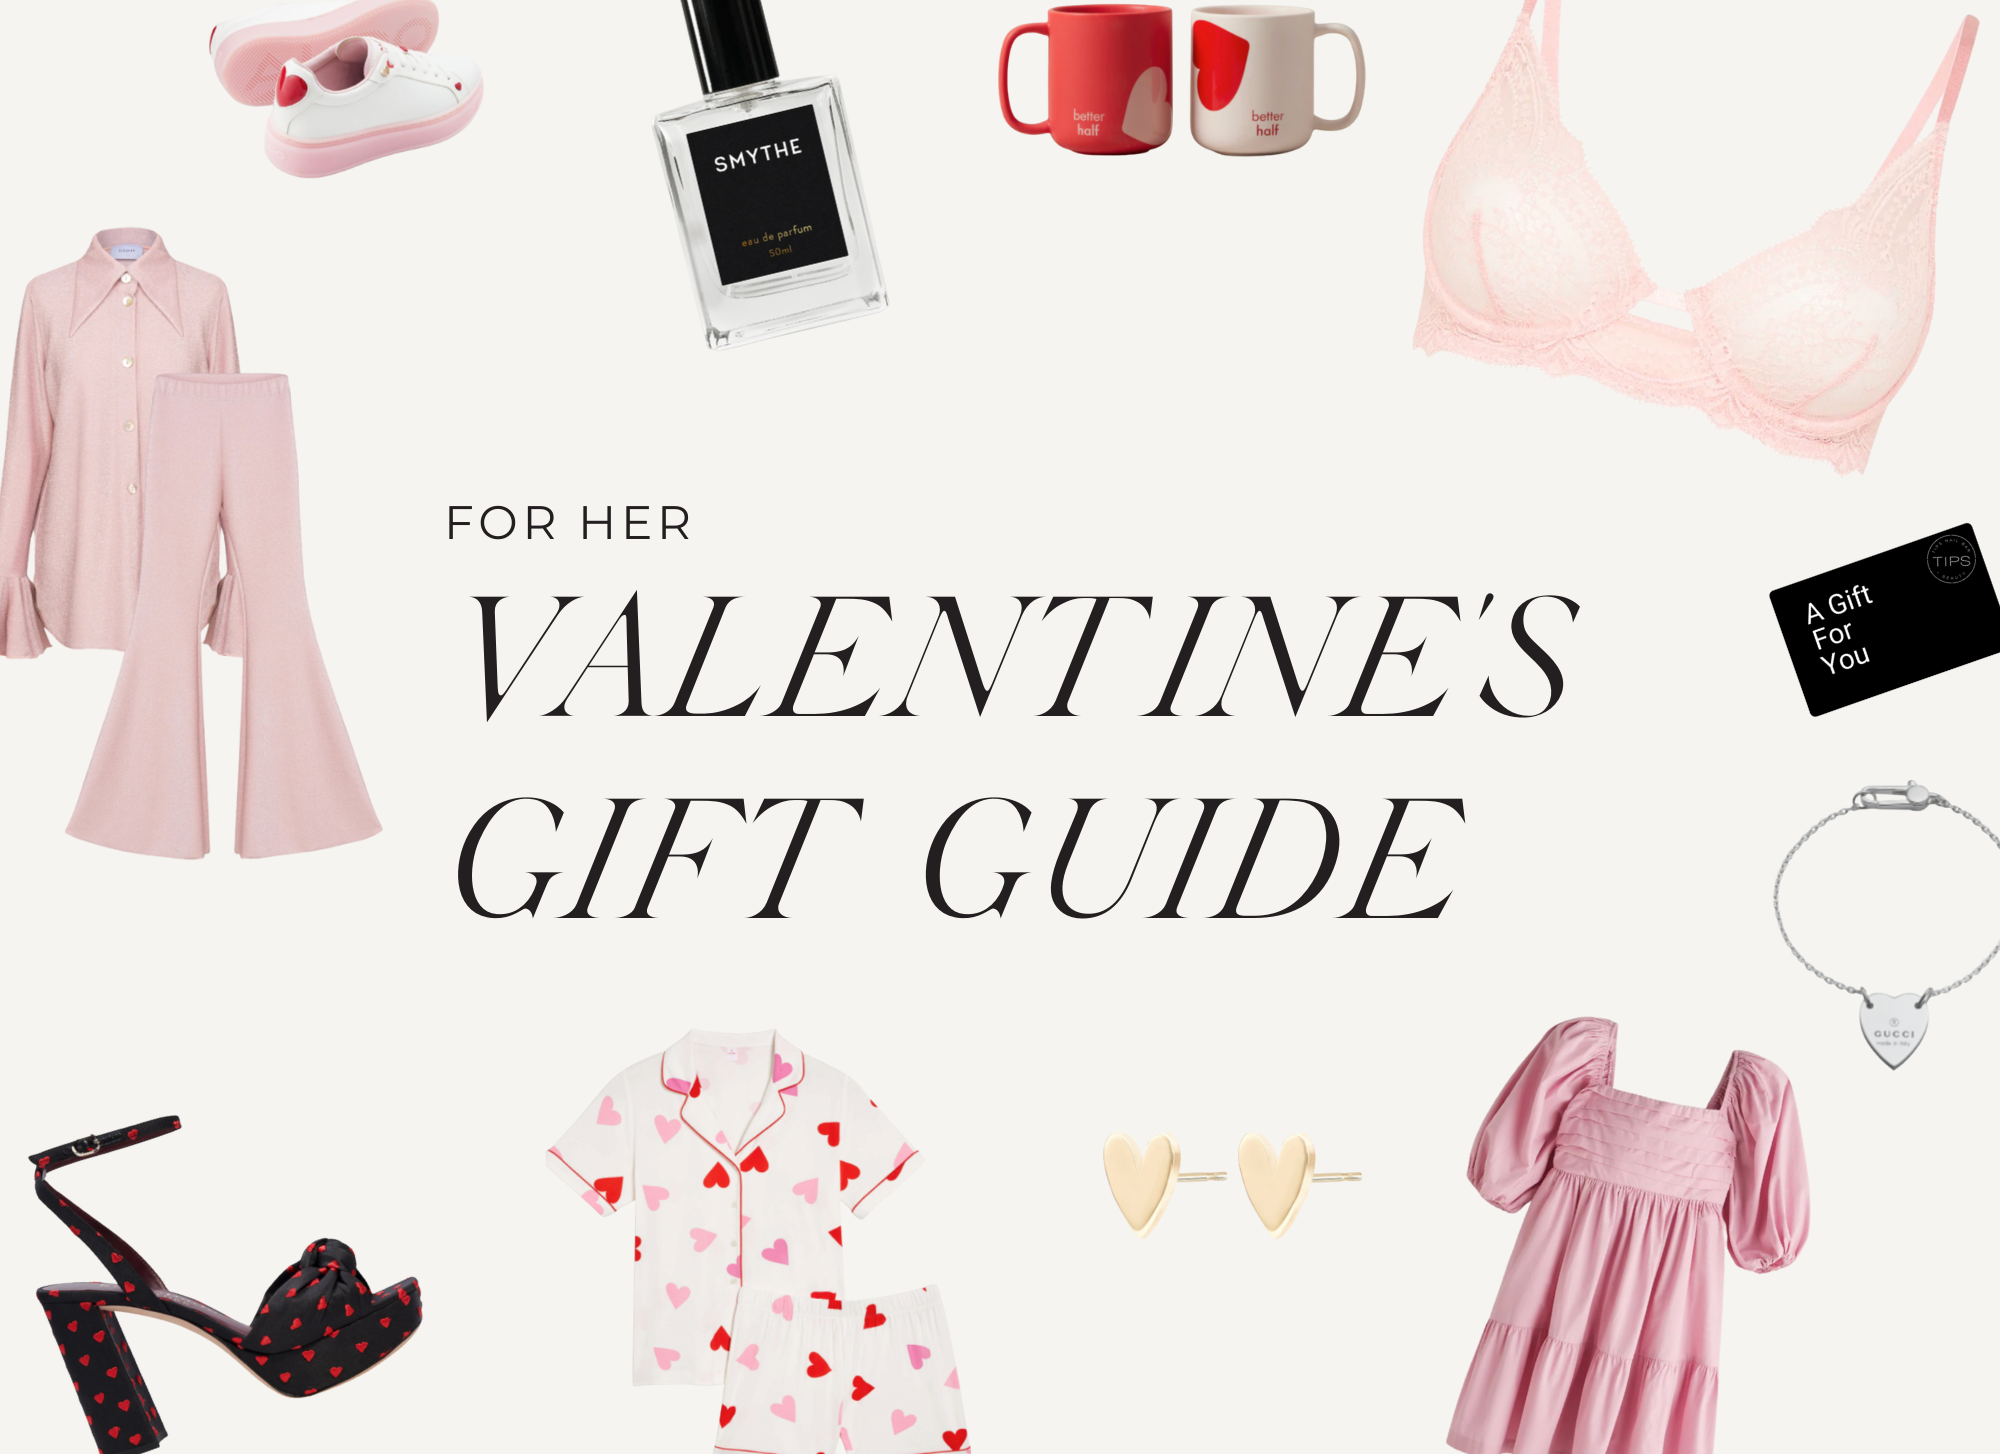 Valentine's Day Lingerie Gift Guide